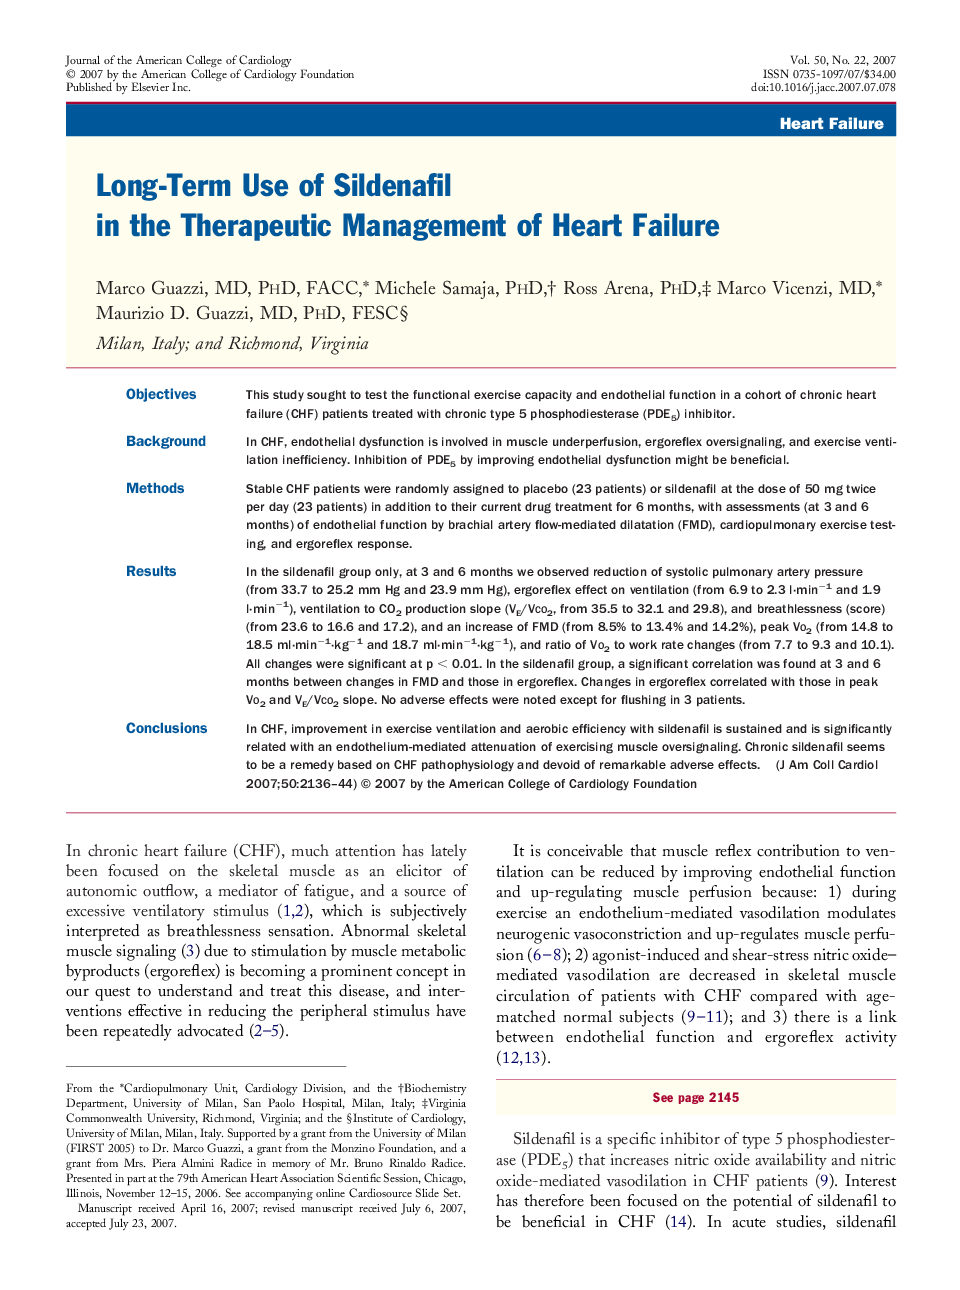 Long-Term Use of Sildenafil in the Therapeutic Management of Heart Failure 